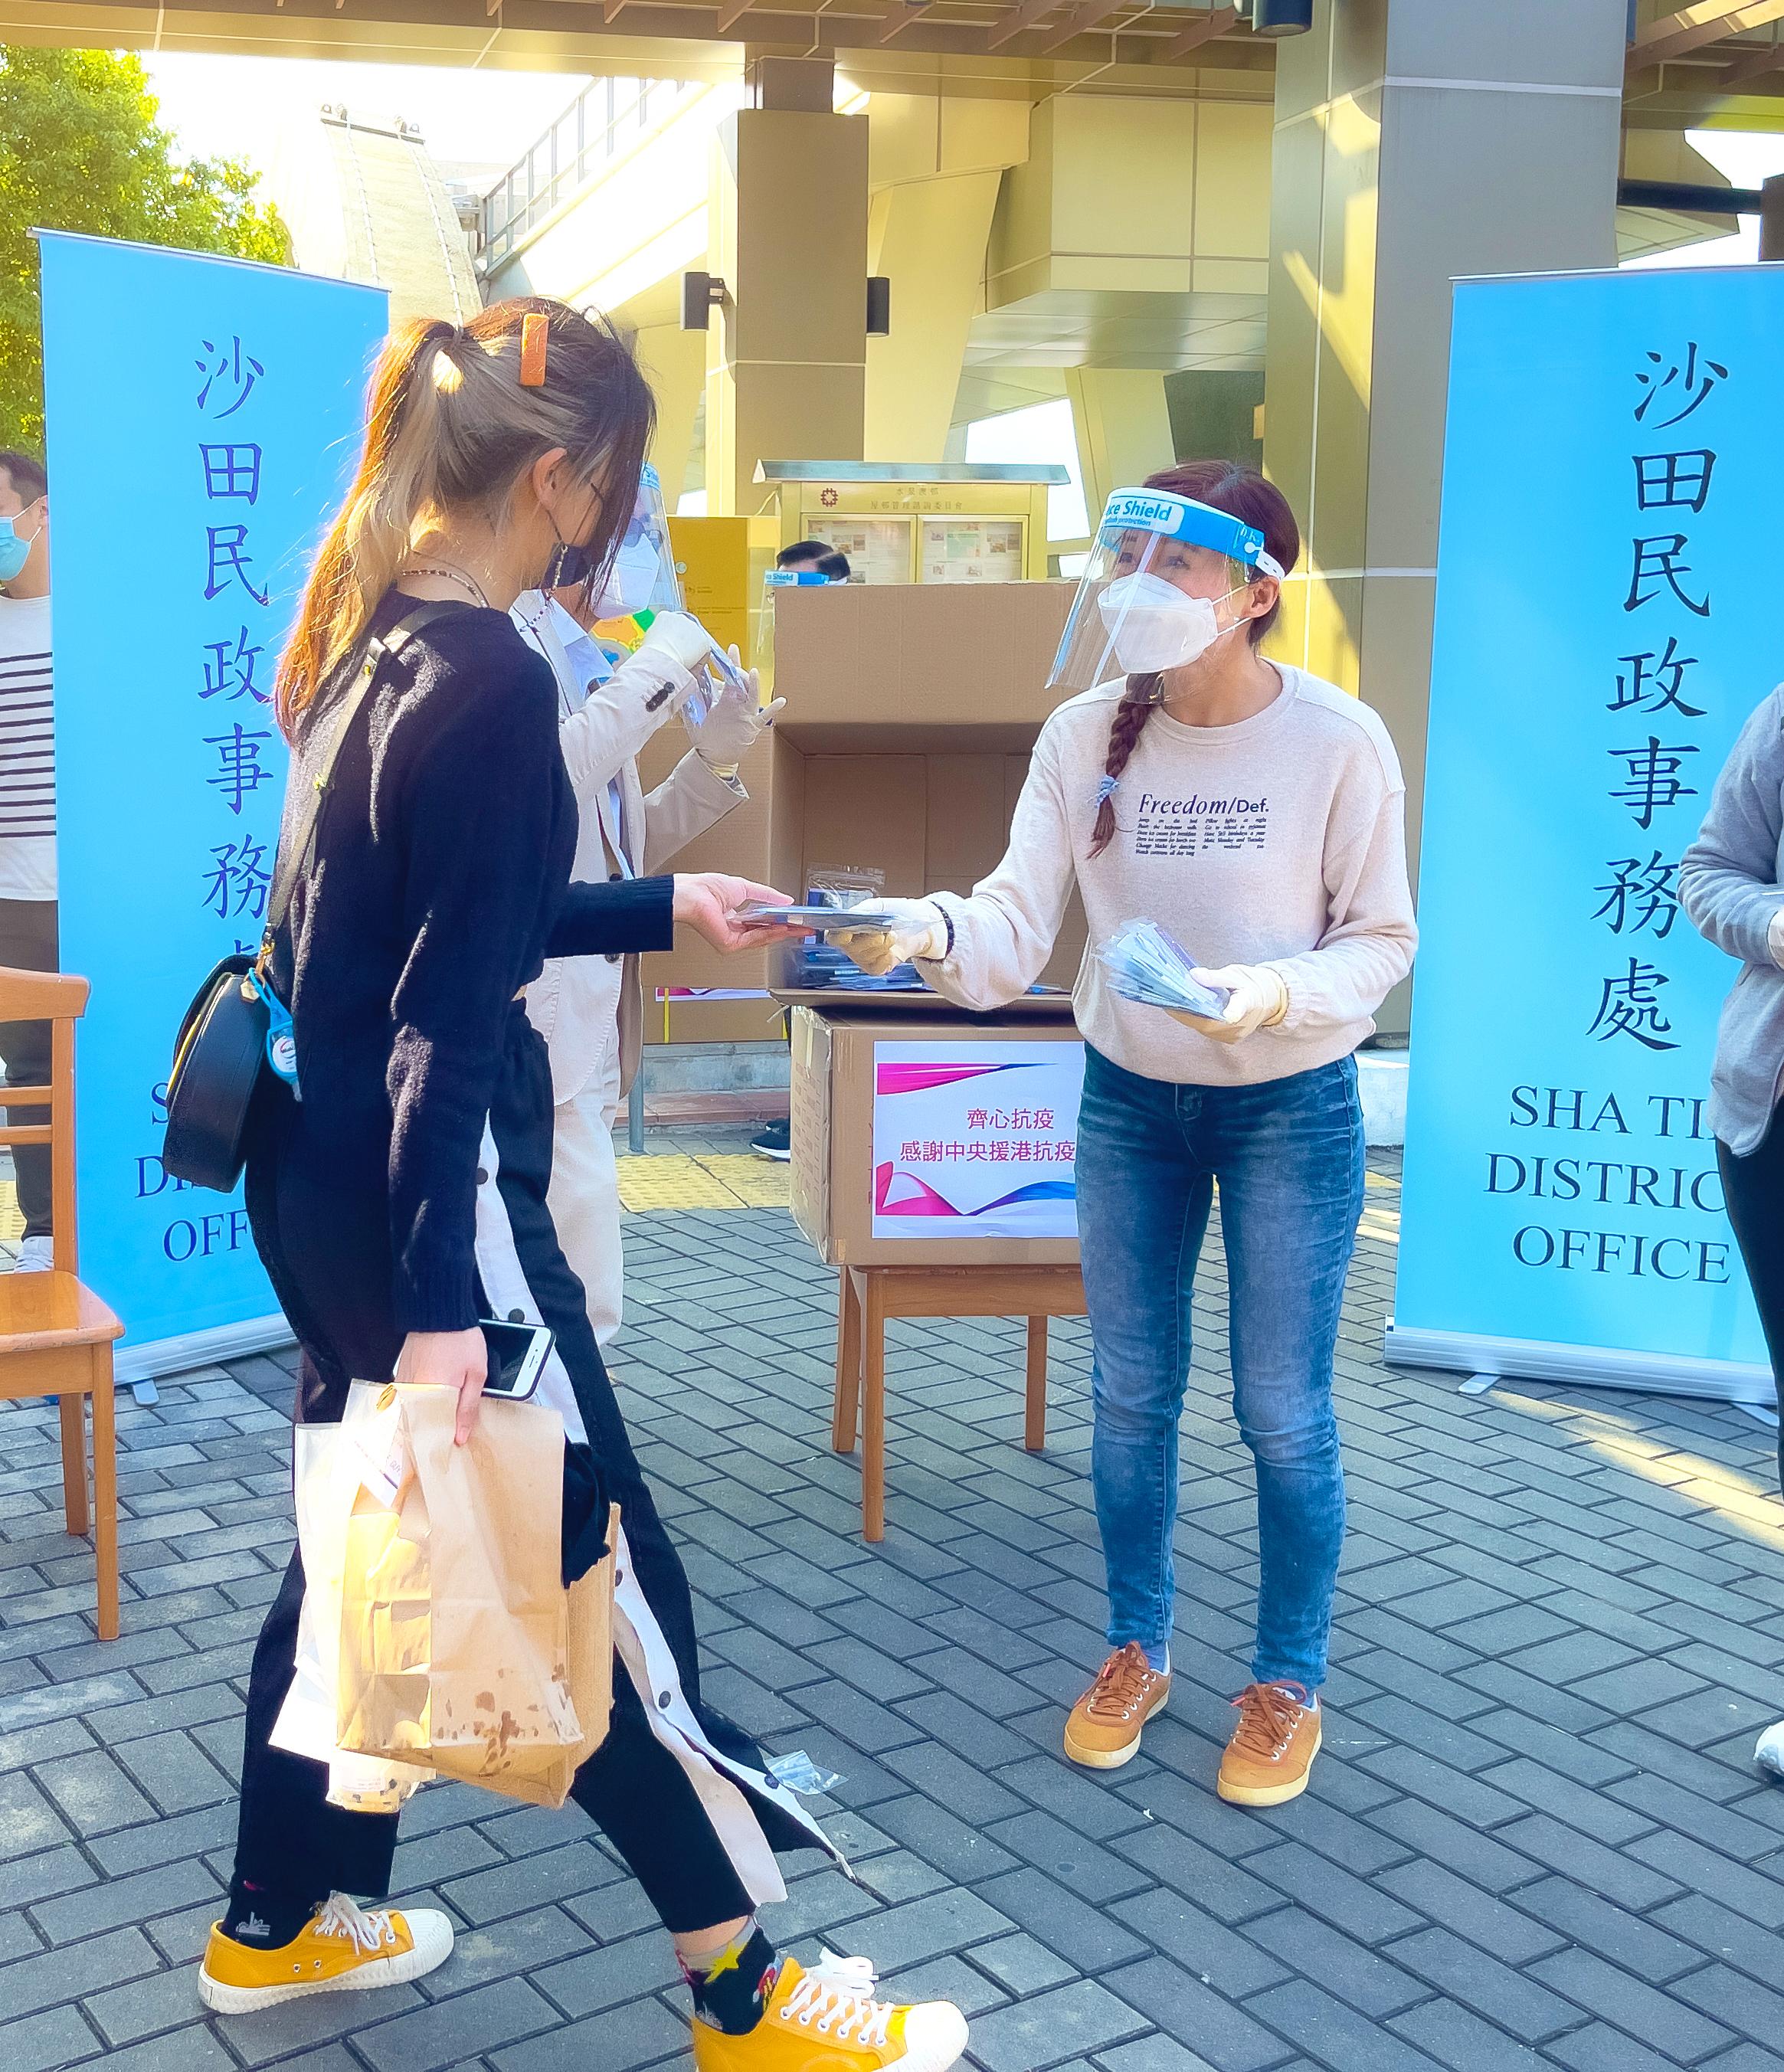 The Sha Tin District Office today (February 27) distributed COVID-19 rapid test kits to residents of Shui Chuen O Estate, Sha Tin, for voluntary testing.